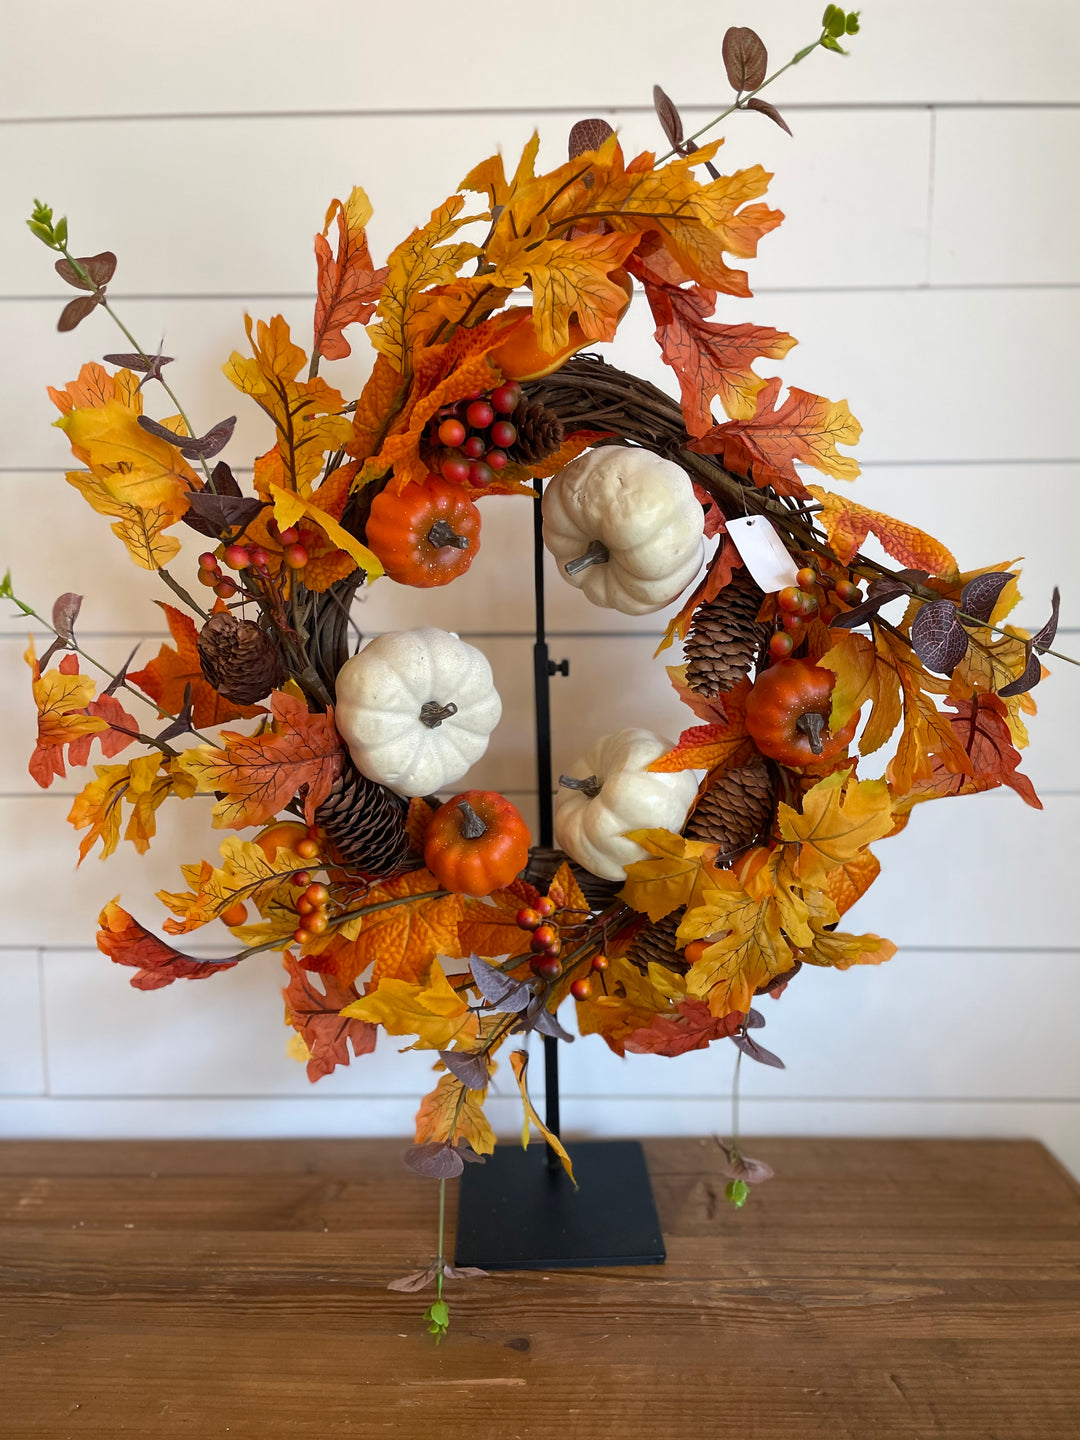 20" Wreath with Pumpkins, Pinecones, and Berries